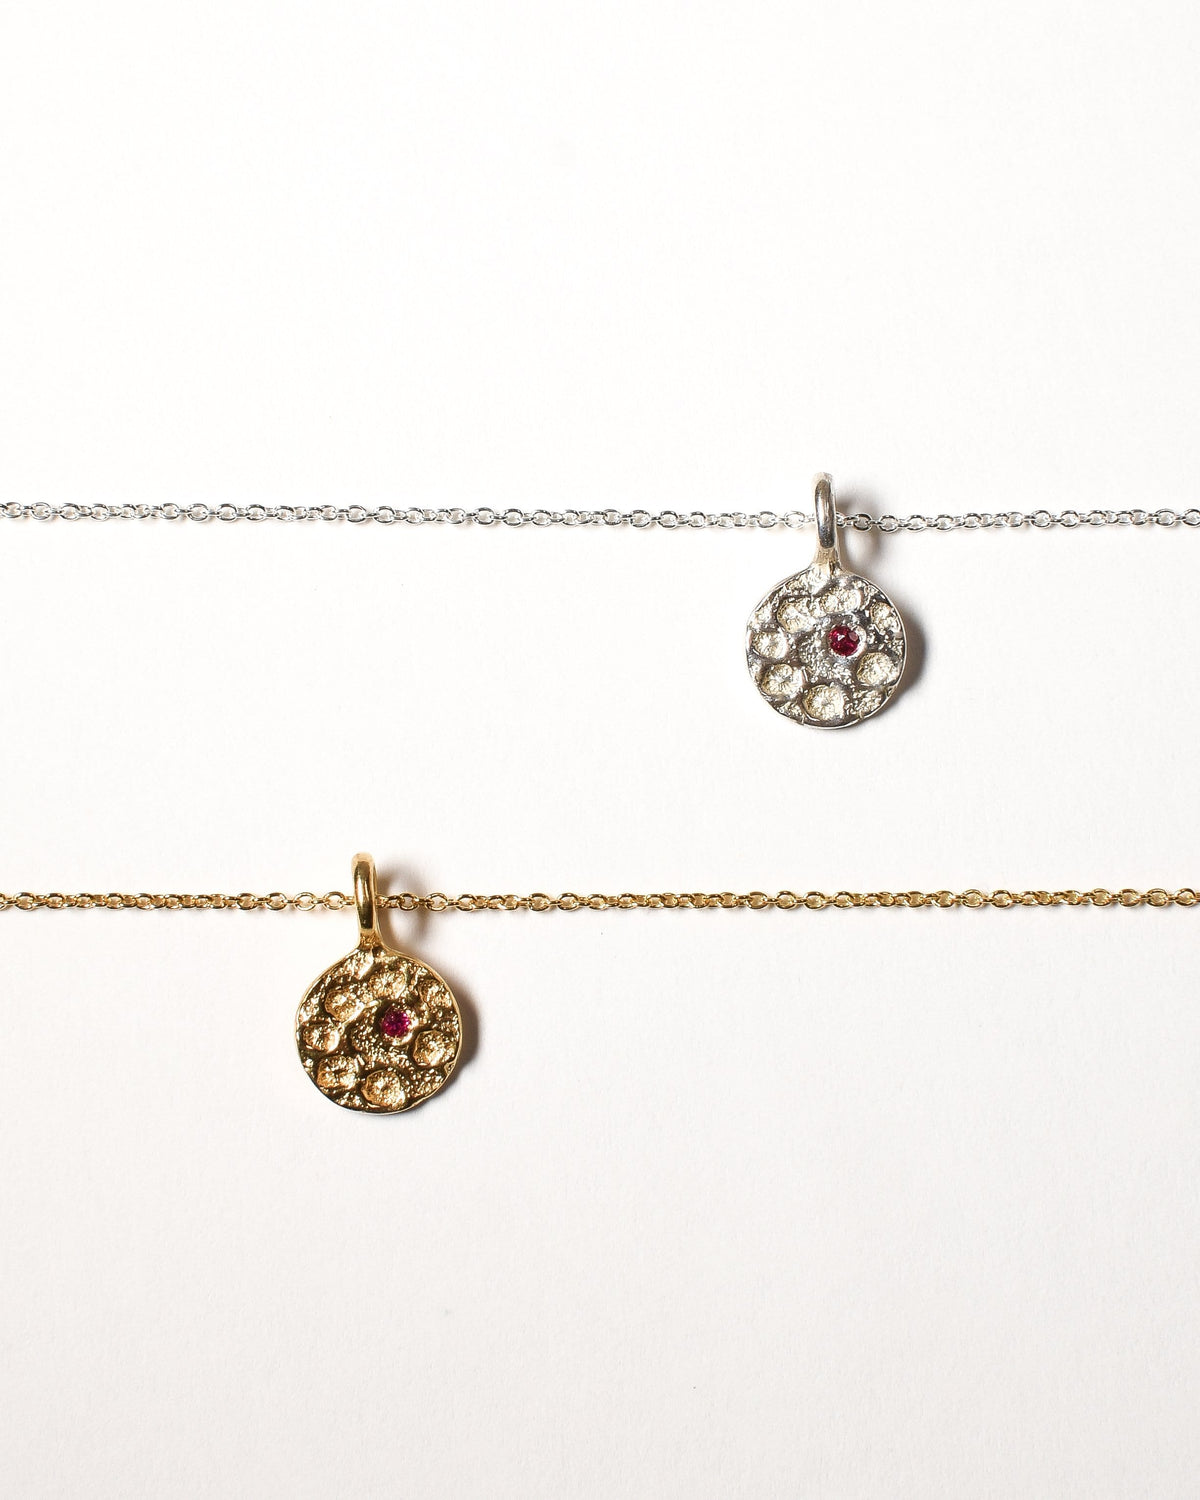 Ruby Birthstone Necklace - July - Yellow Gold